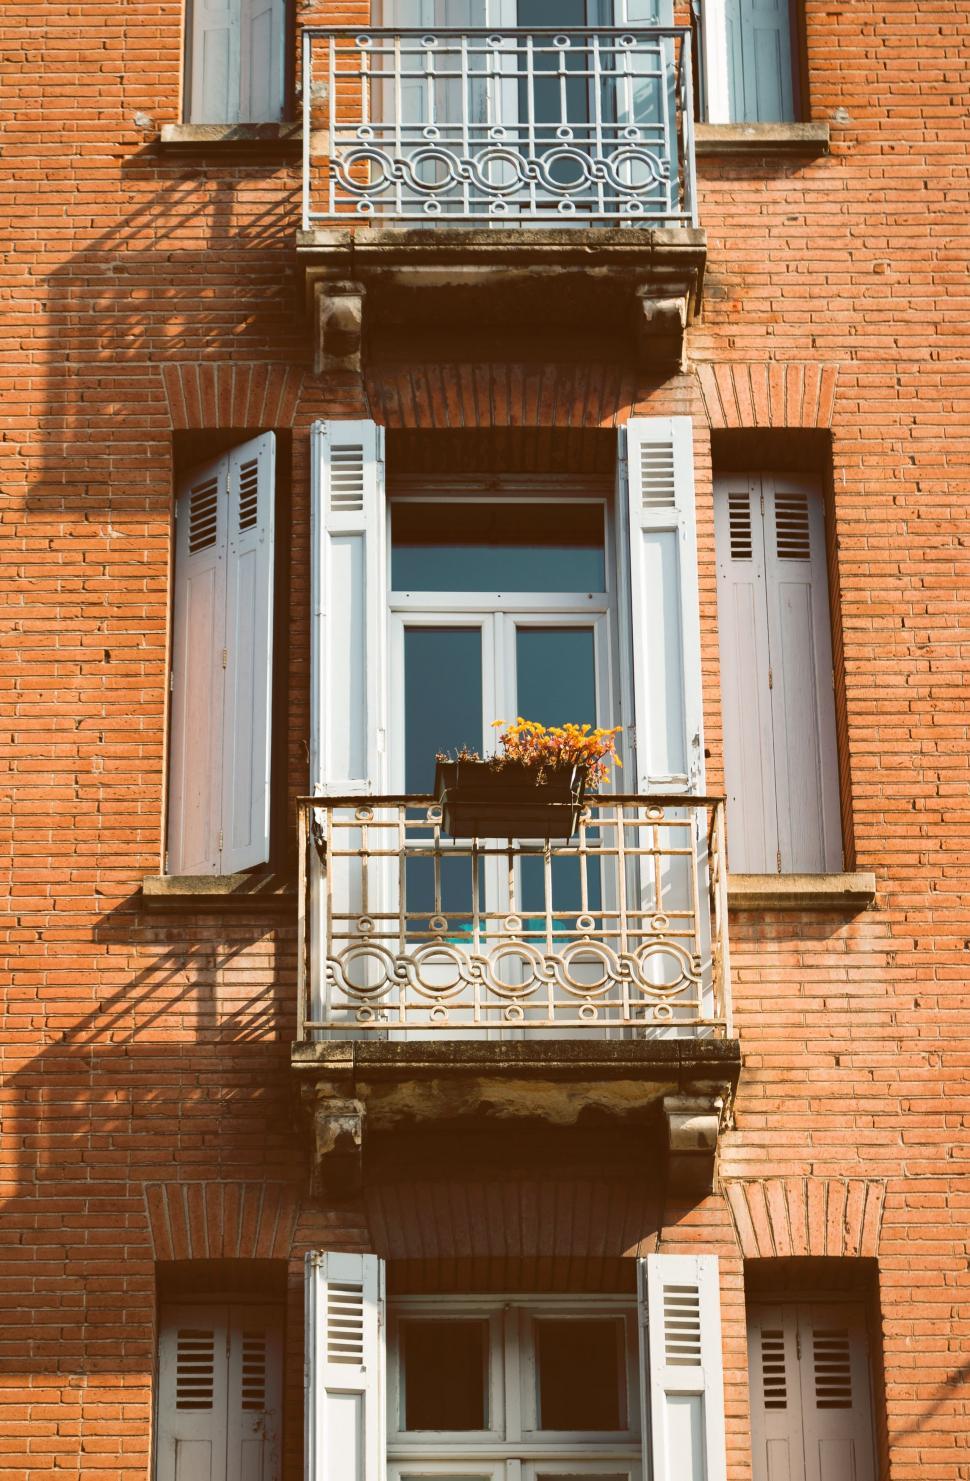 Free Image of Tall Brick Building With Balcony and Balconies 